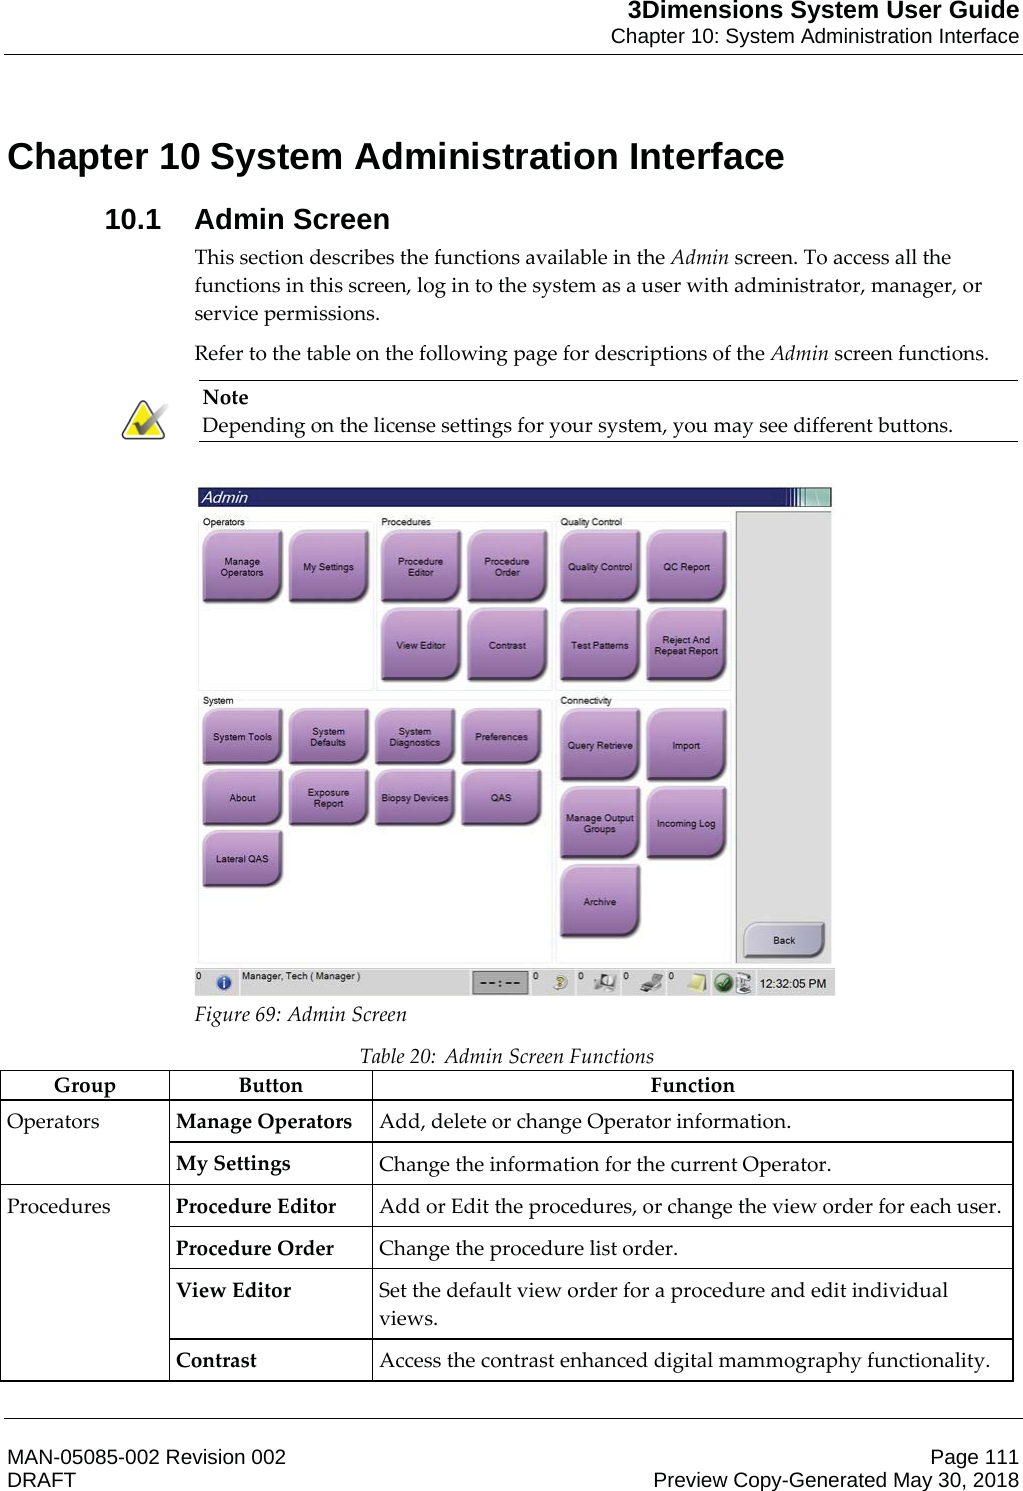 3Dimensions System User GuideChapter 10: System Administration InterfaceMAN-05085-002 Revision 002 Page 111DRAFT Preview Copy-Generated May 30, 201810: System Administration Interface10.1 Admin ScreenThis section describes the functions available in the Admin screen. To access all the functions in this screen, log in to the system as a user with administrator, manager, or service permissions. Refer to the table on the following page for descriptions of the Admin screen functions. Note Depending on the license settings for your system, you may see different buttons.    Figure 69: Admin Screen Table 20: Admin Screen Functions Group Button  Function Operators  Manage Operators Add, delete or change Operator information. My Settings Change the information for the current Operator. Procedures  Procedure Editor Add or Edit the procedures, or change the view order for each user. Procedure Order Change the procedure list order. View Editor Set the default view order for a procedure and edit individual views. Contrast Access the contrast enhanced digital mammography functionality. Chapter 10